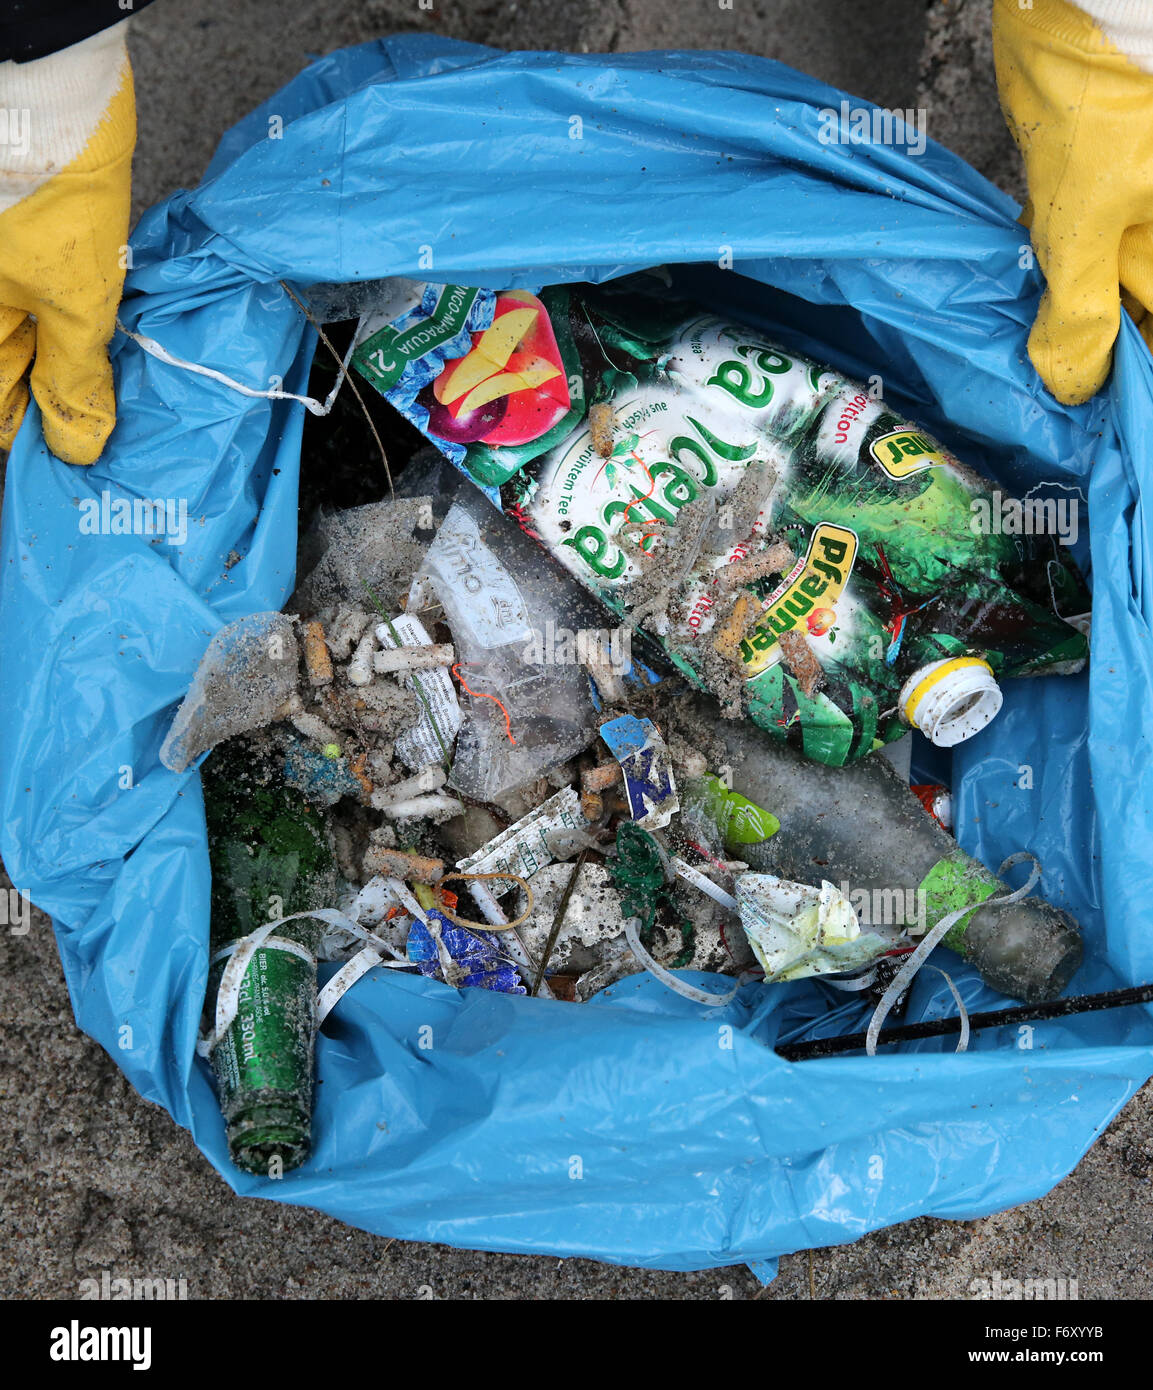 Rostock, Germany. 20th Nov, 2015. Activists collect garbage at the Baltic Sea beach of Rostock, Germany, 20 November 2015. The Nature and Biodiversity Conservation Union (NABU) and Oekohaus Rostock (lit. Rostock Eco House) held a day of action entitled 'Plastic waste in the ocean' to draw attention to the large amounts of plastic waste drifting through the seas that span square kilometres. Photo: BERND WUESTNECK/dpa/Alamy Live News Stock Photo